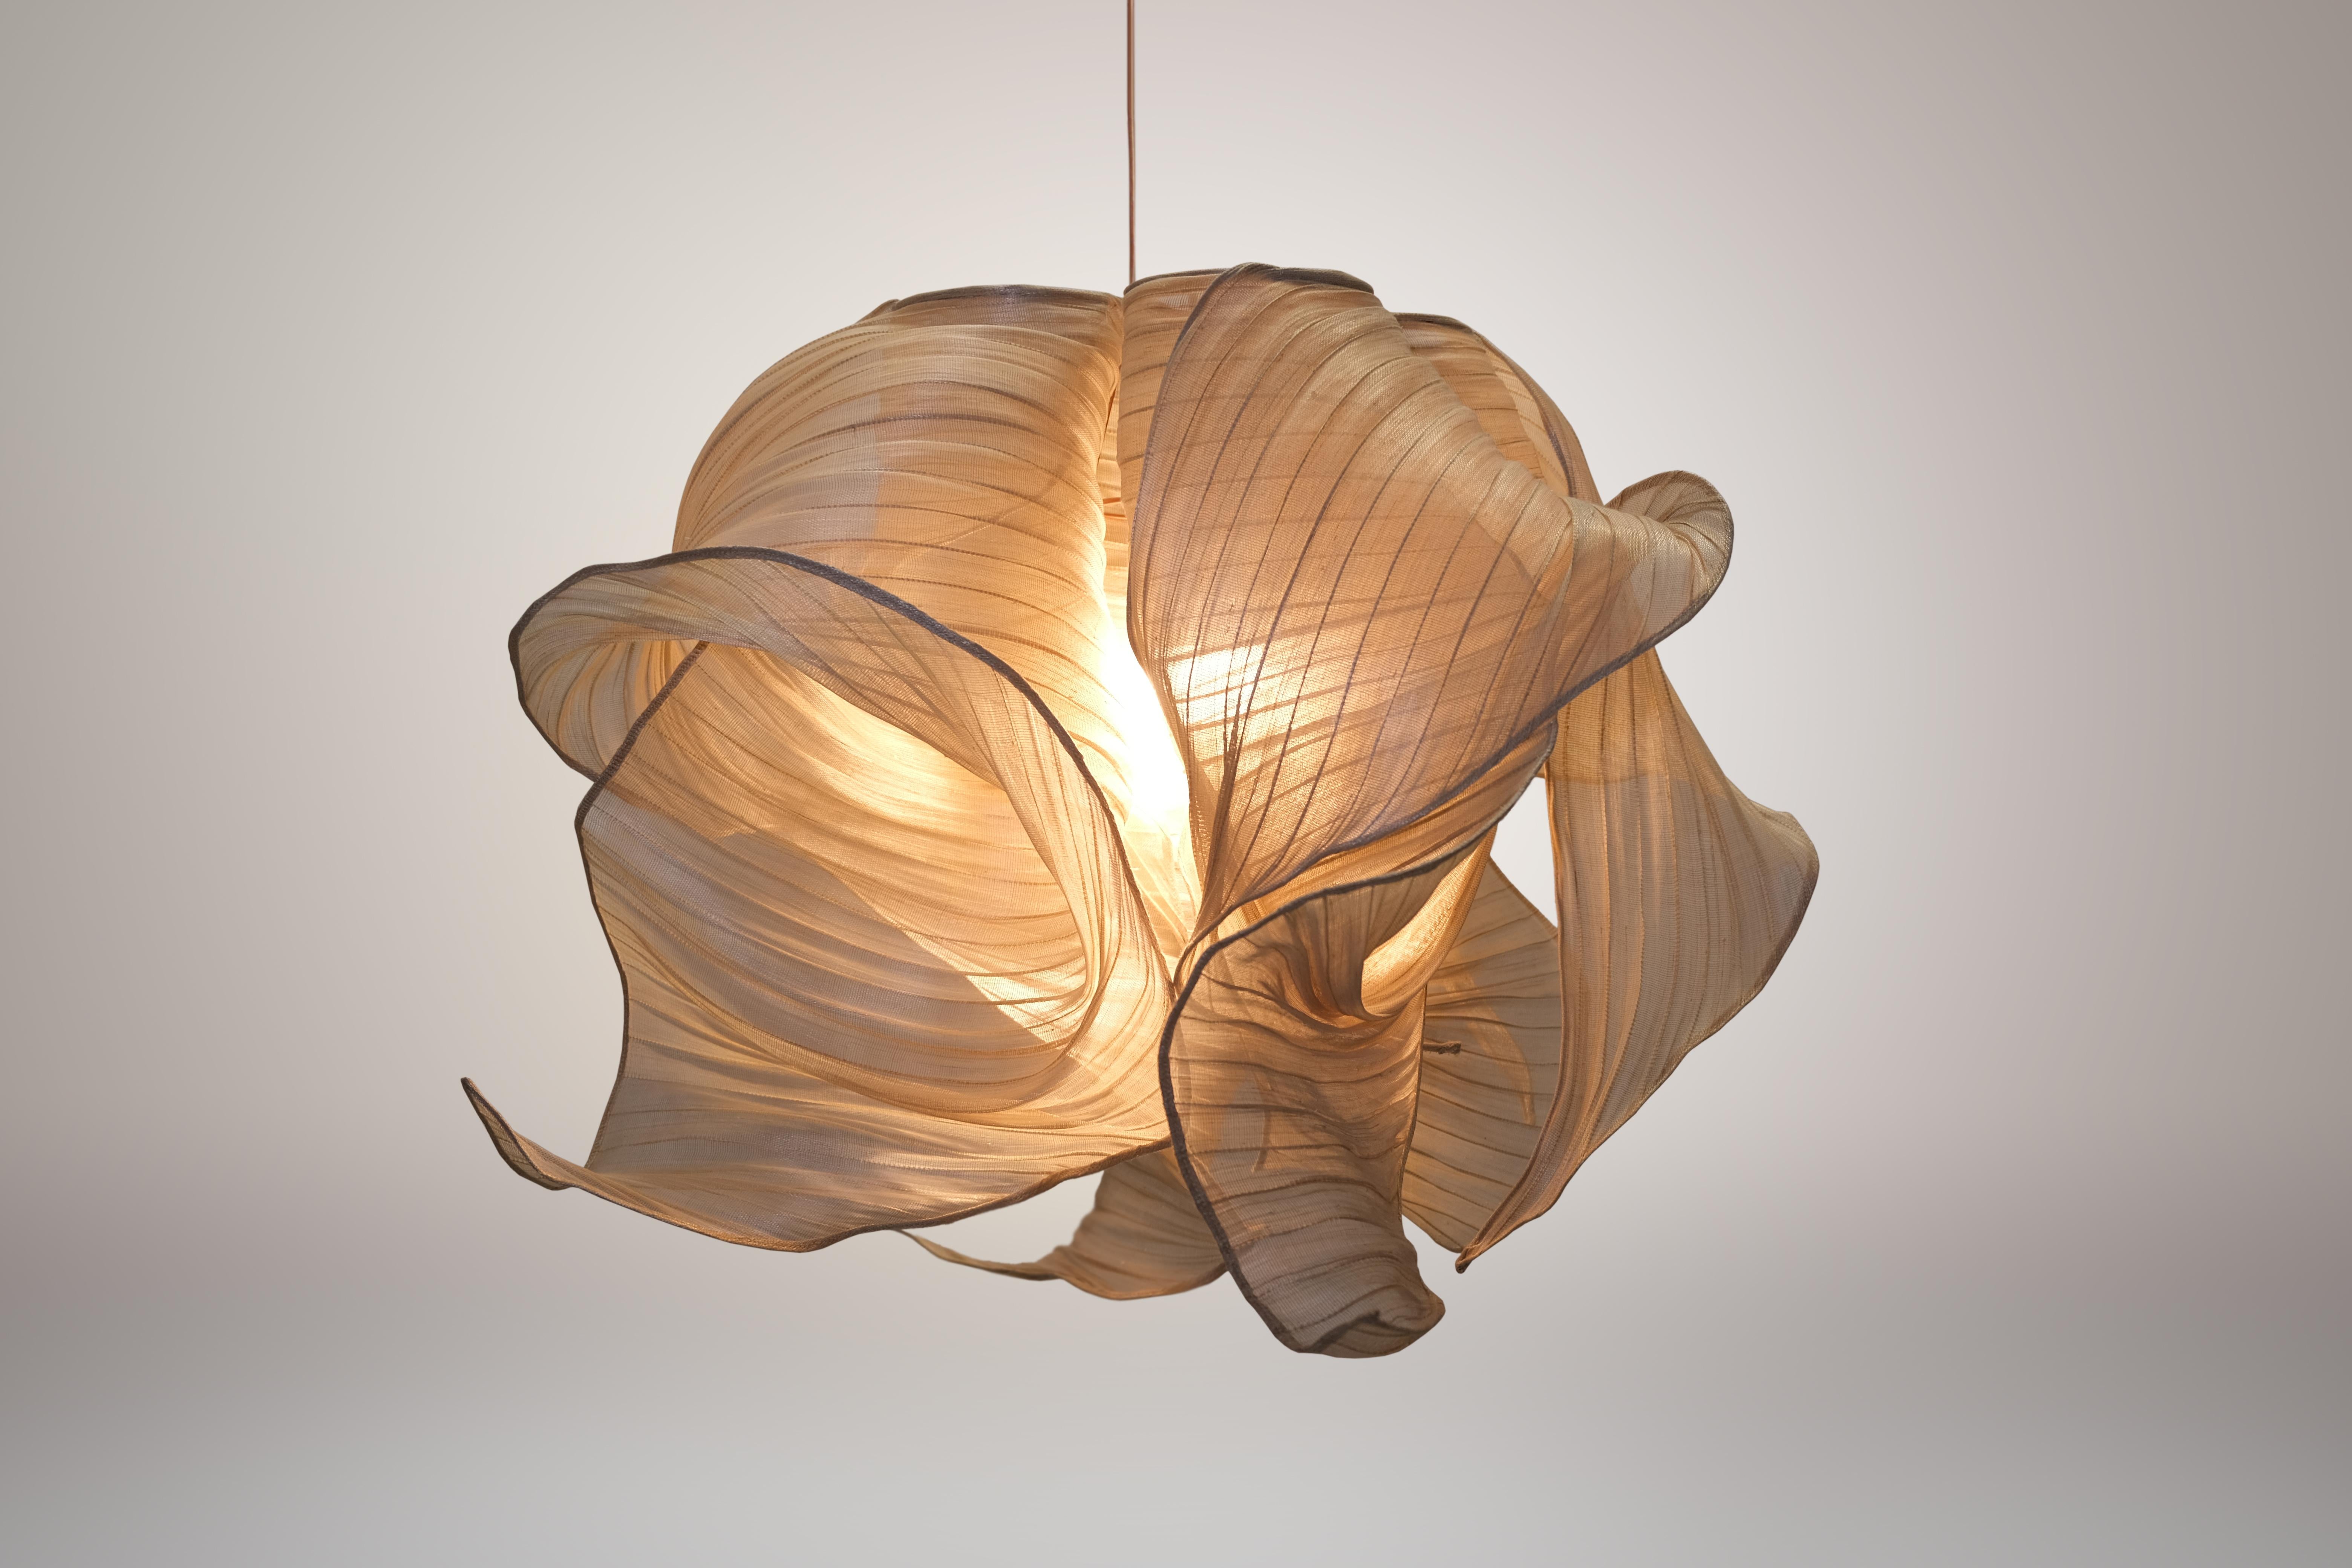 Natural Nebula pendant lamp by Mirei Monticelli
Dimensions: d 60 x w 60 x h 60 cm
Materials: Banaca fabric
Also available in hand painted fabric.

Providing soft light in an organic and unique design, the Nebula Lamp draws its inspiration from